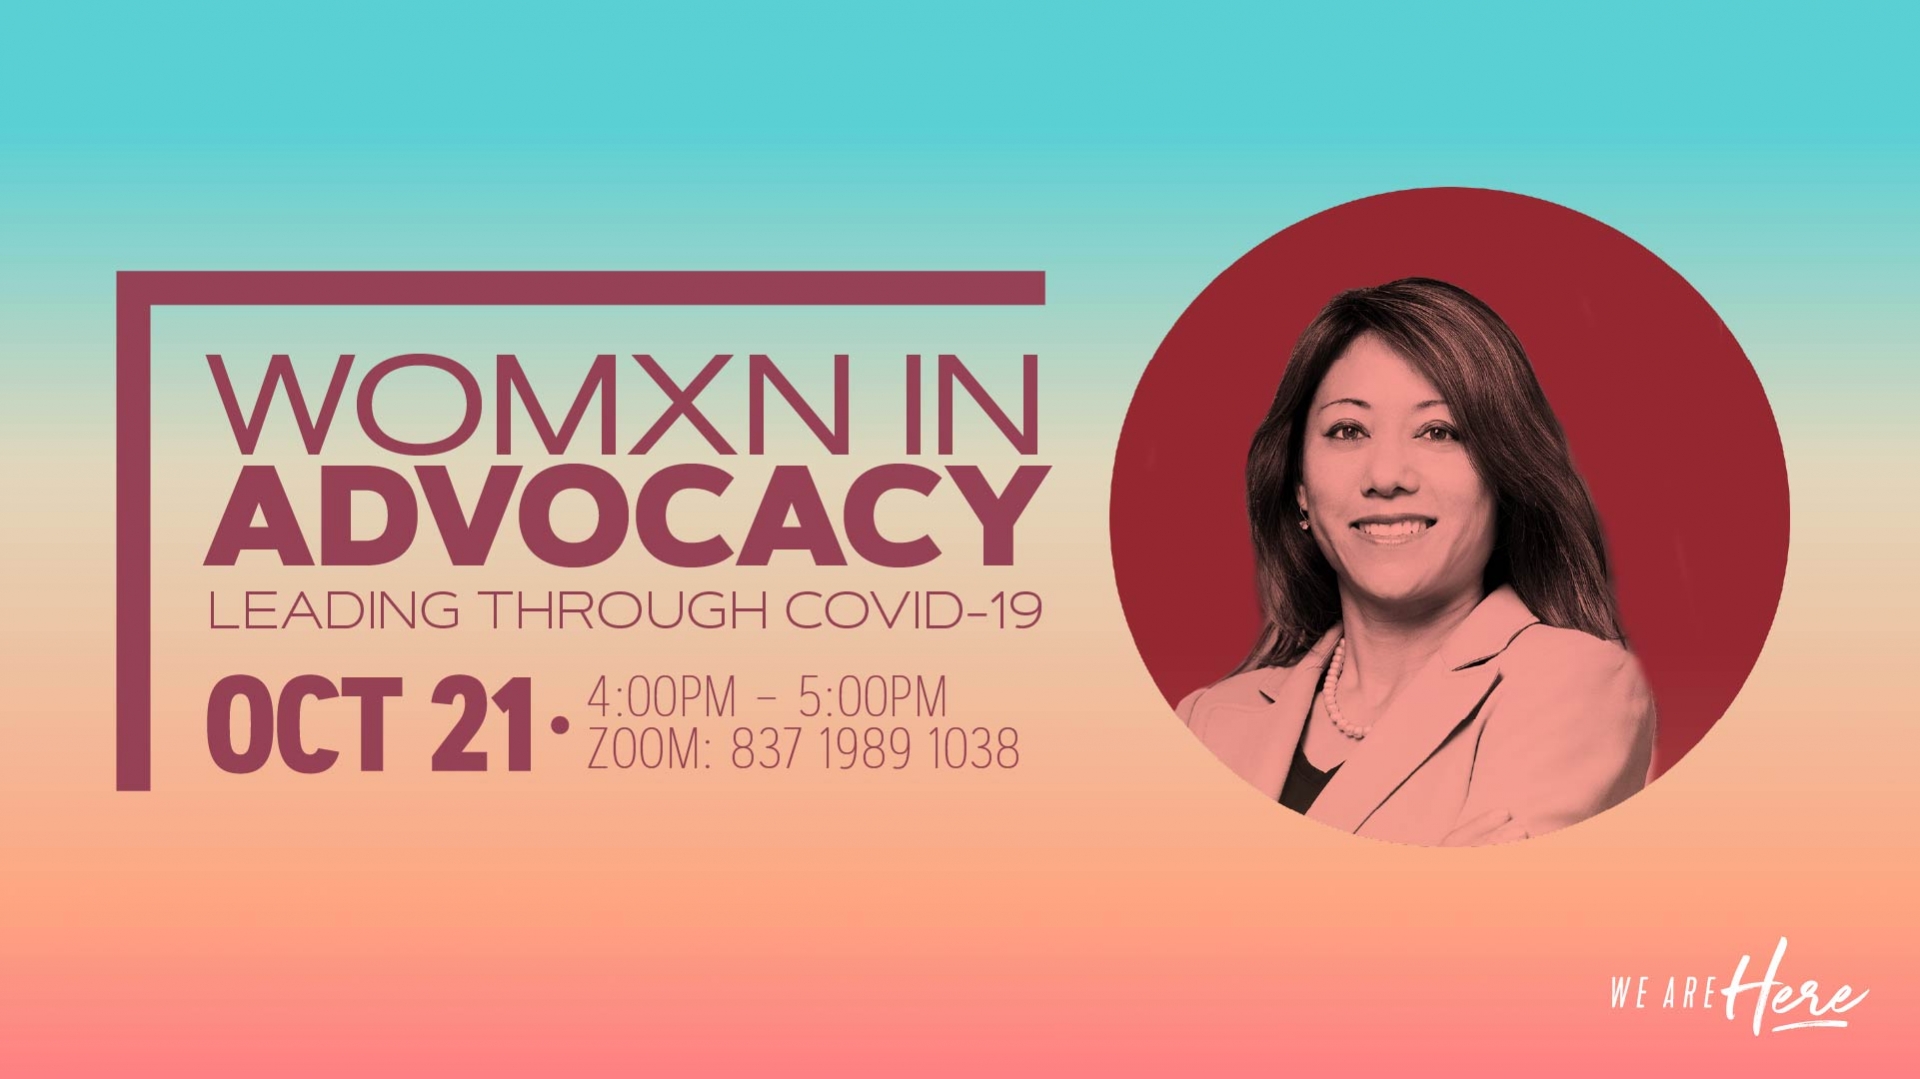 Womxn in Advocacy: Leading through COVID-19